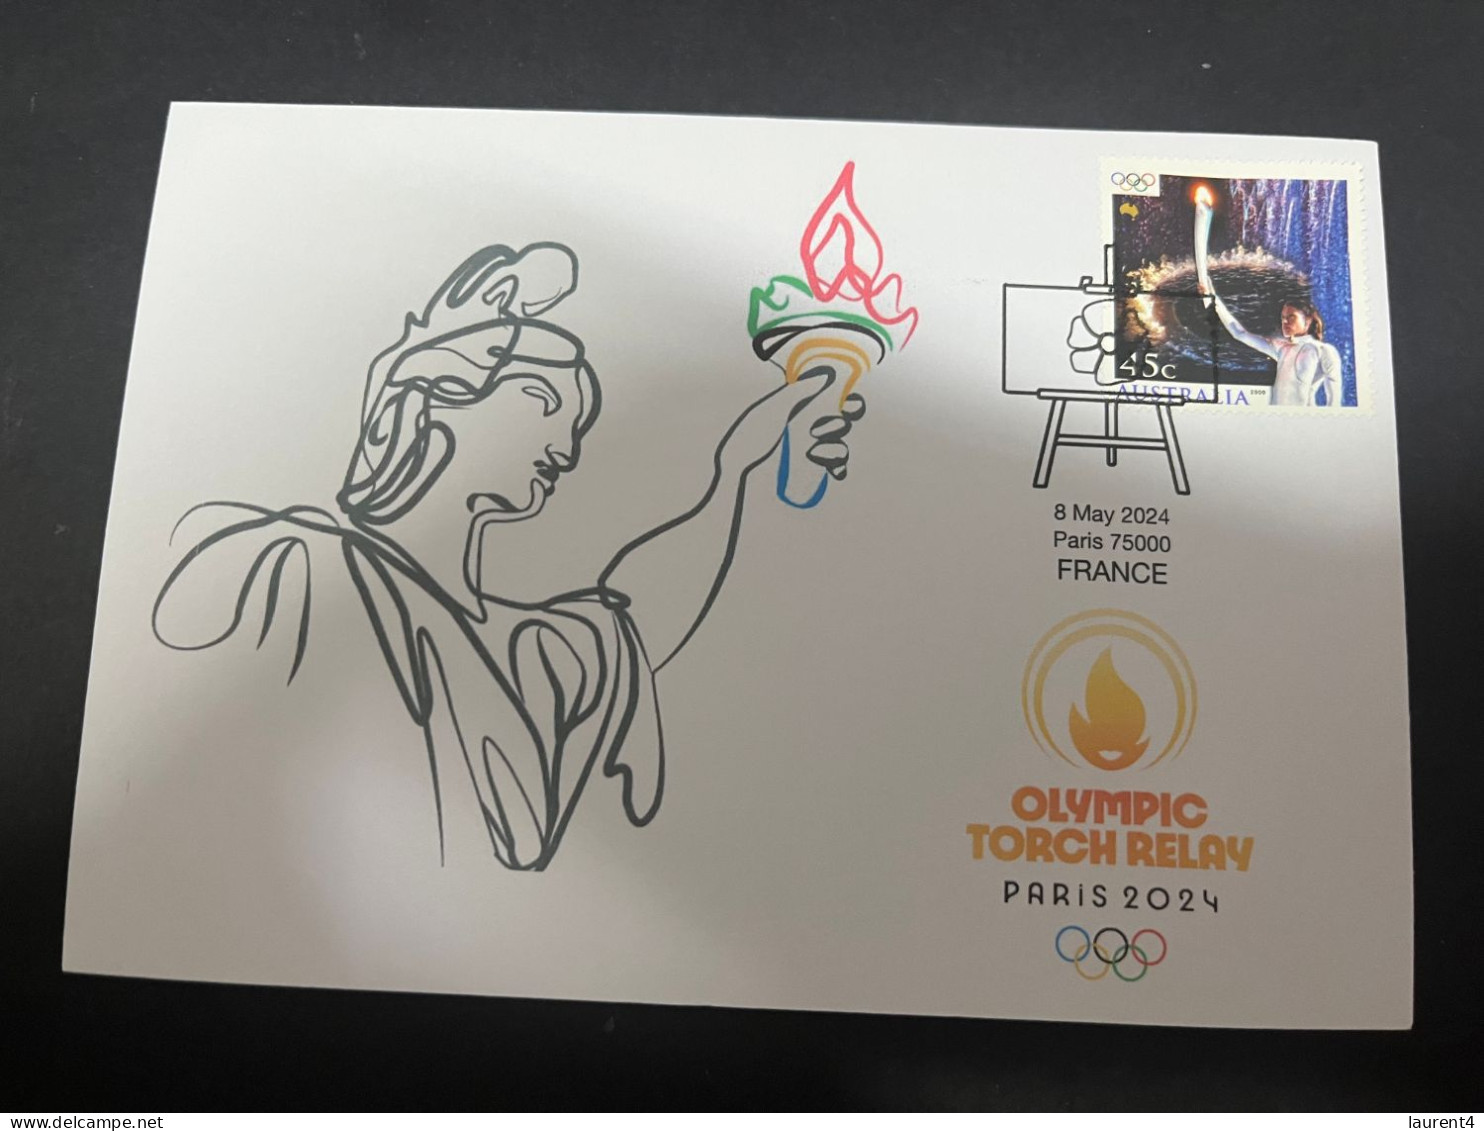 12-5-2024 (5 Z 2) Paris Olympic Games 2024 - Torch Relay In France (with Olympic Torch Relay Sydney Cathy Freeman Stamp) - Sommer 2024: Paris